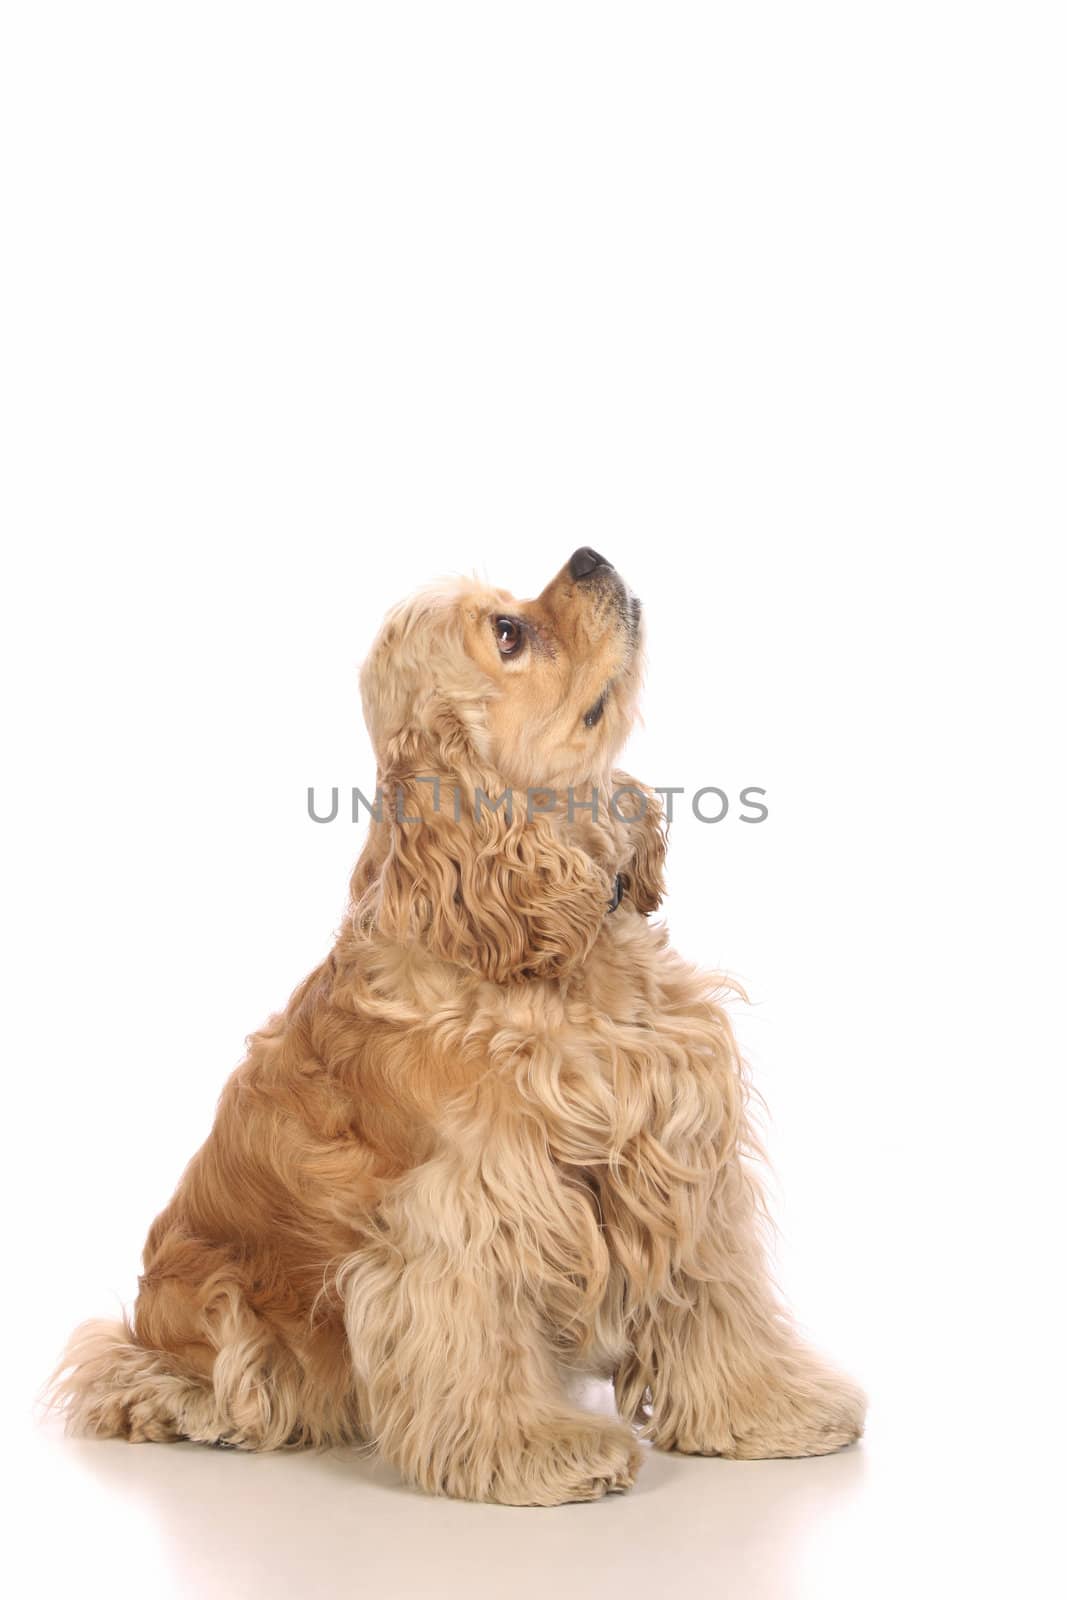 American Cocker Spaniel looking up, isolated on white background